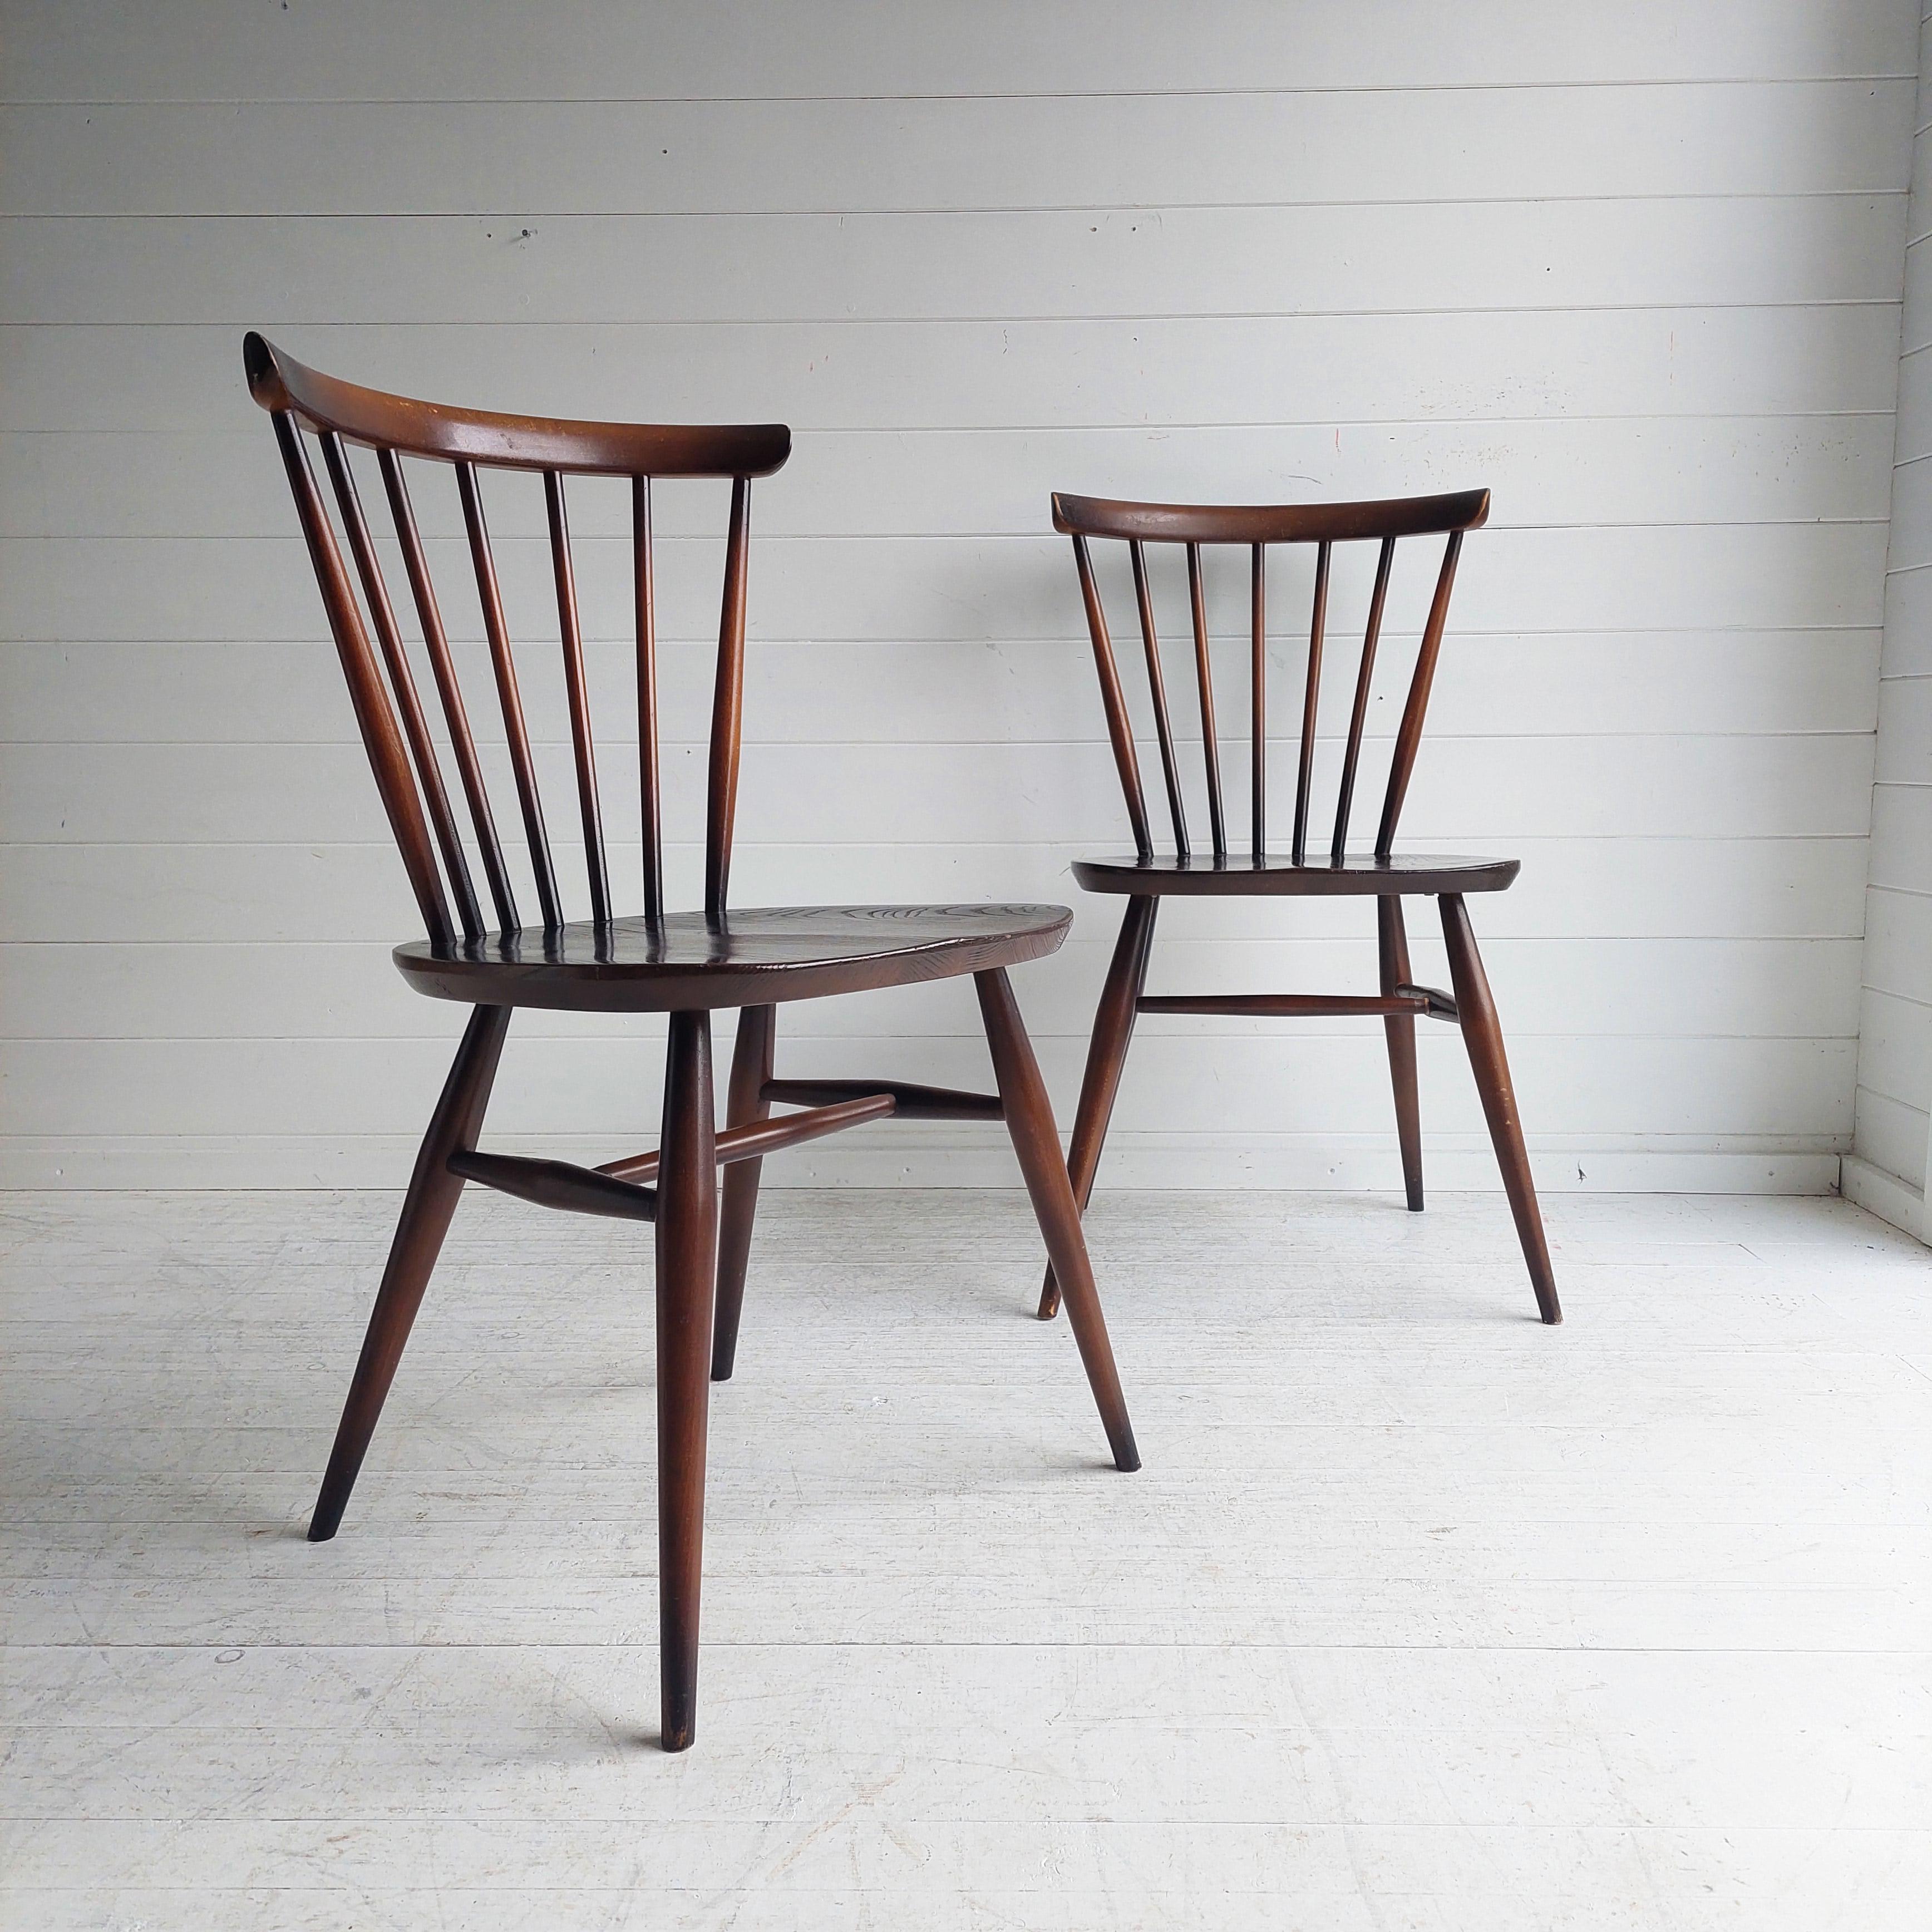 A set of 2 vintage Ercol model 449 bow back dining chairs.
Original dark brown finish
Beautifully designed and crafted model 449 stick back chairs designed by Lucian Ercolani for Ercol in the 1950/60s.
A classic of the Ercol design